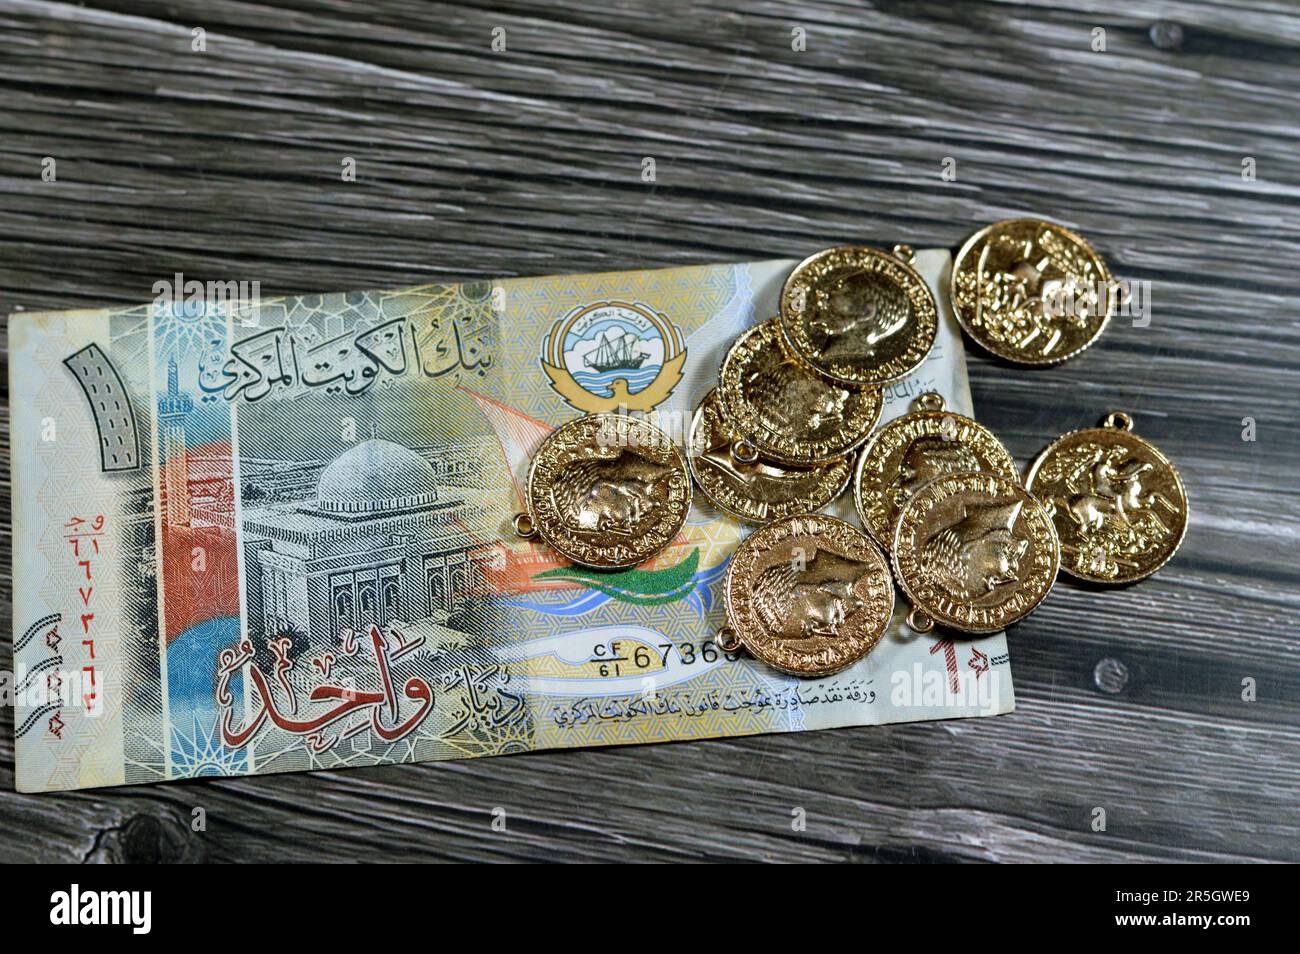 one Kuwaiti dinar bill banknote 1 KWD with influences of Ancient Greek Civilization in Kuwait Failaka, grand mosque, bateel dhow ship with sovereign B Stock Photo